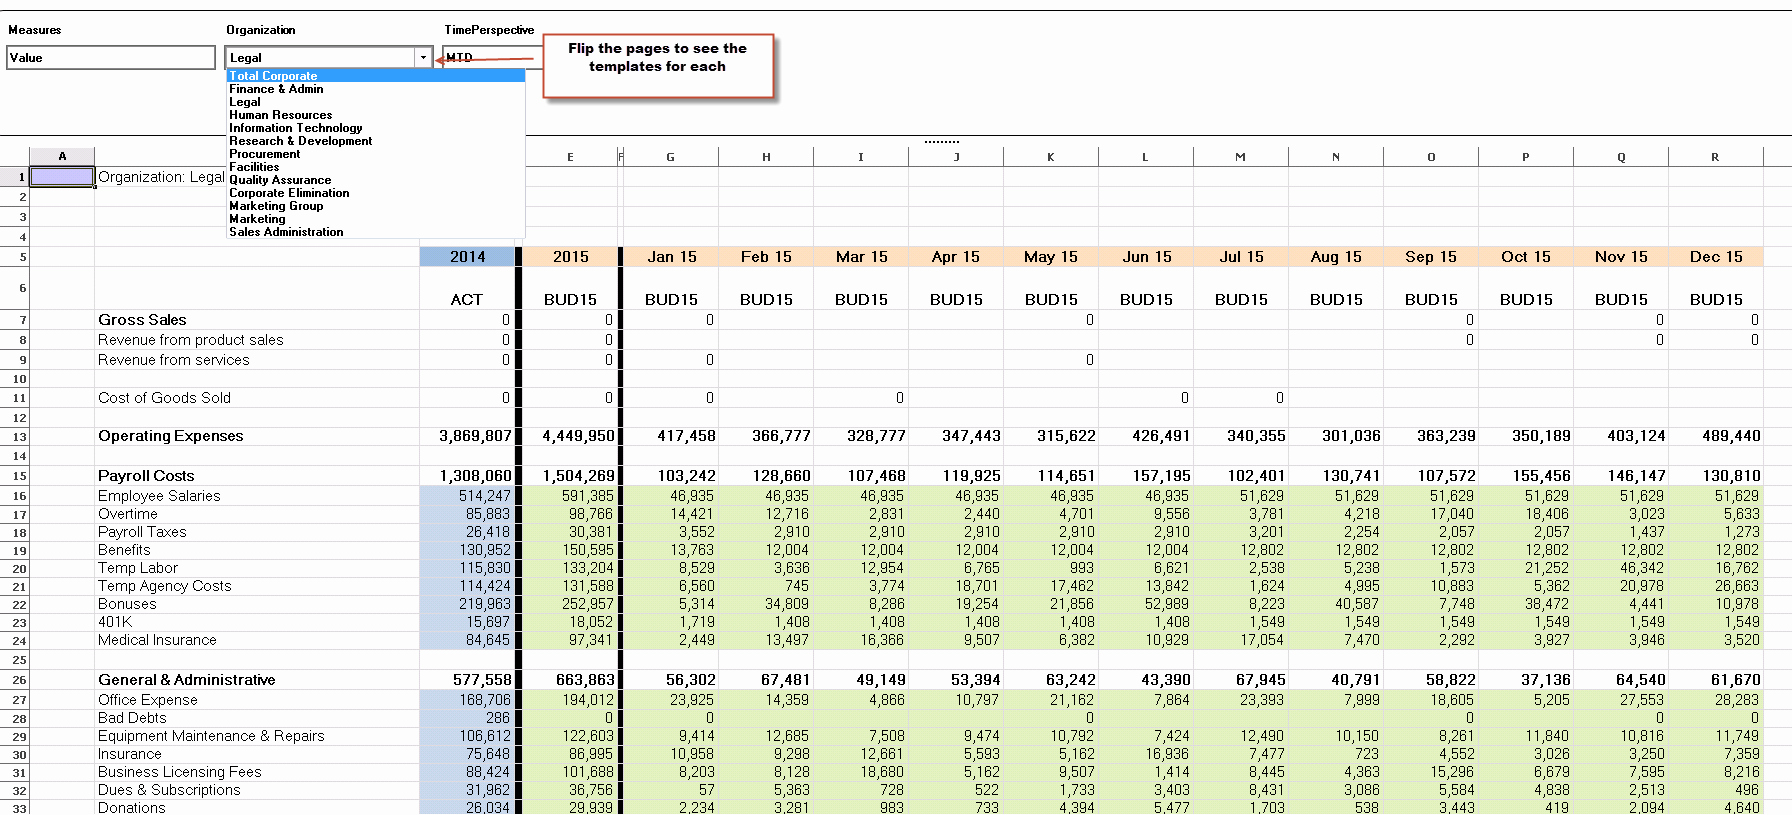 Department Budget Template Excel Lovely Bud Ing and forecasting with Prophix Part 2 – Creating